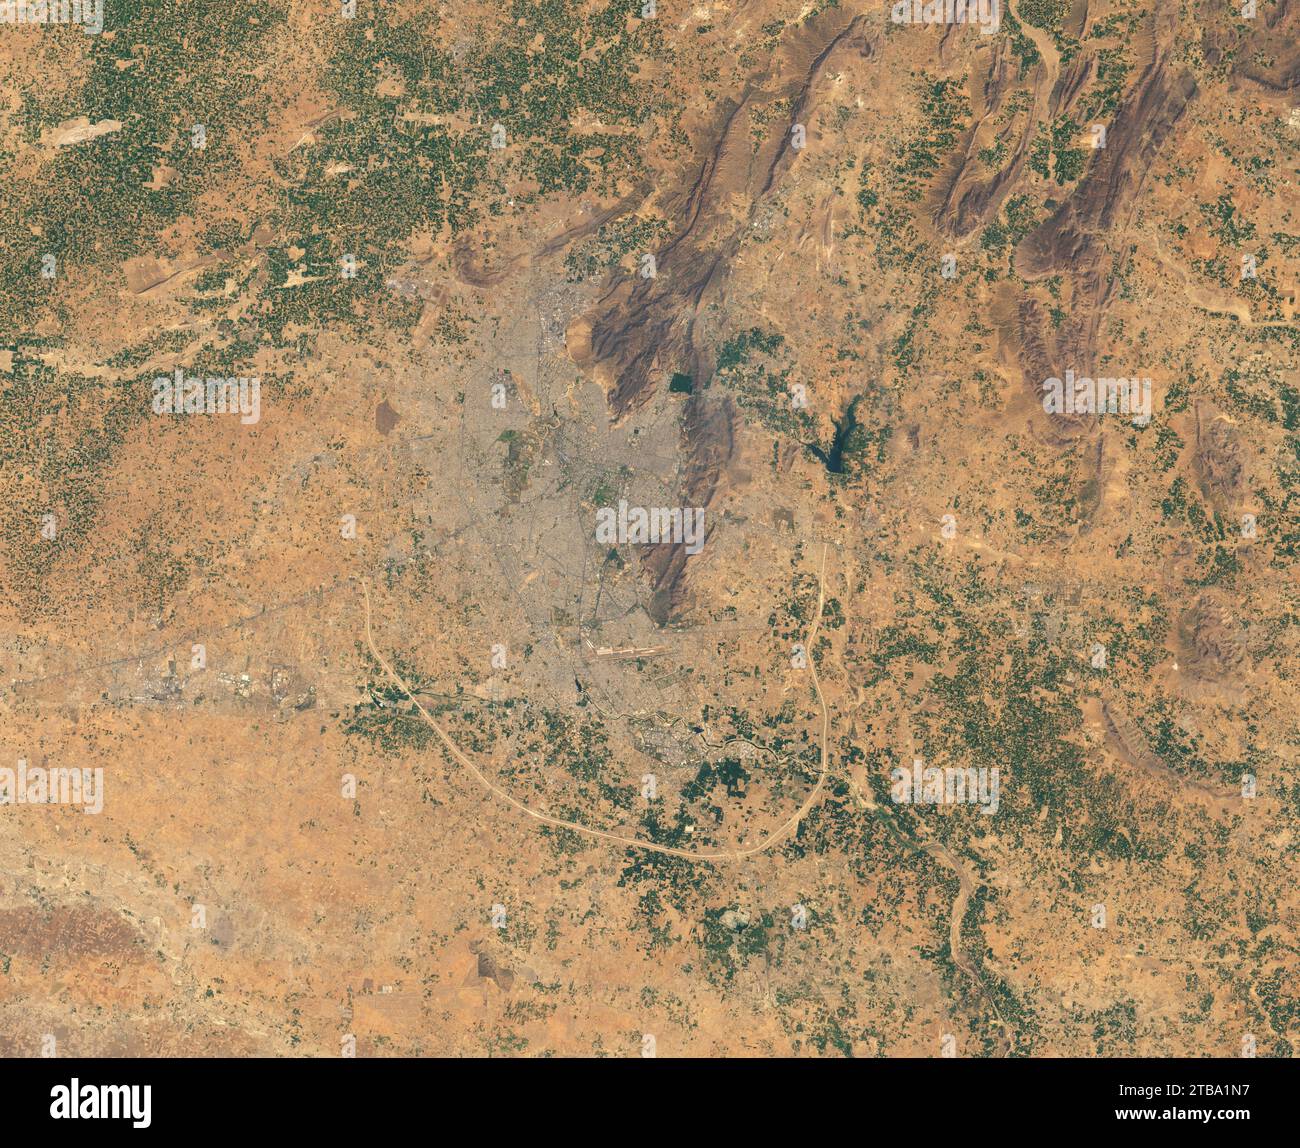 Satellite view of the city of Jaipur. Stock Photo